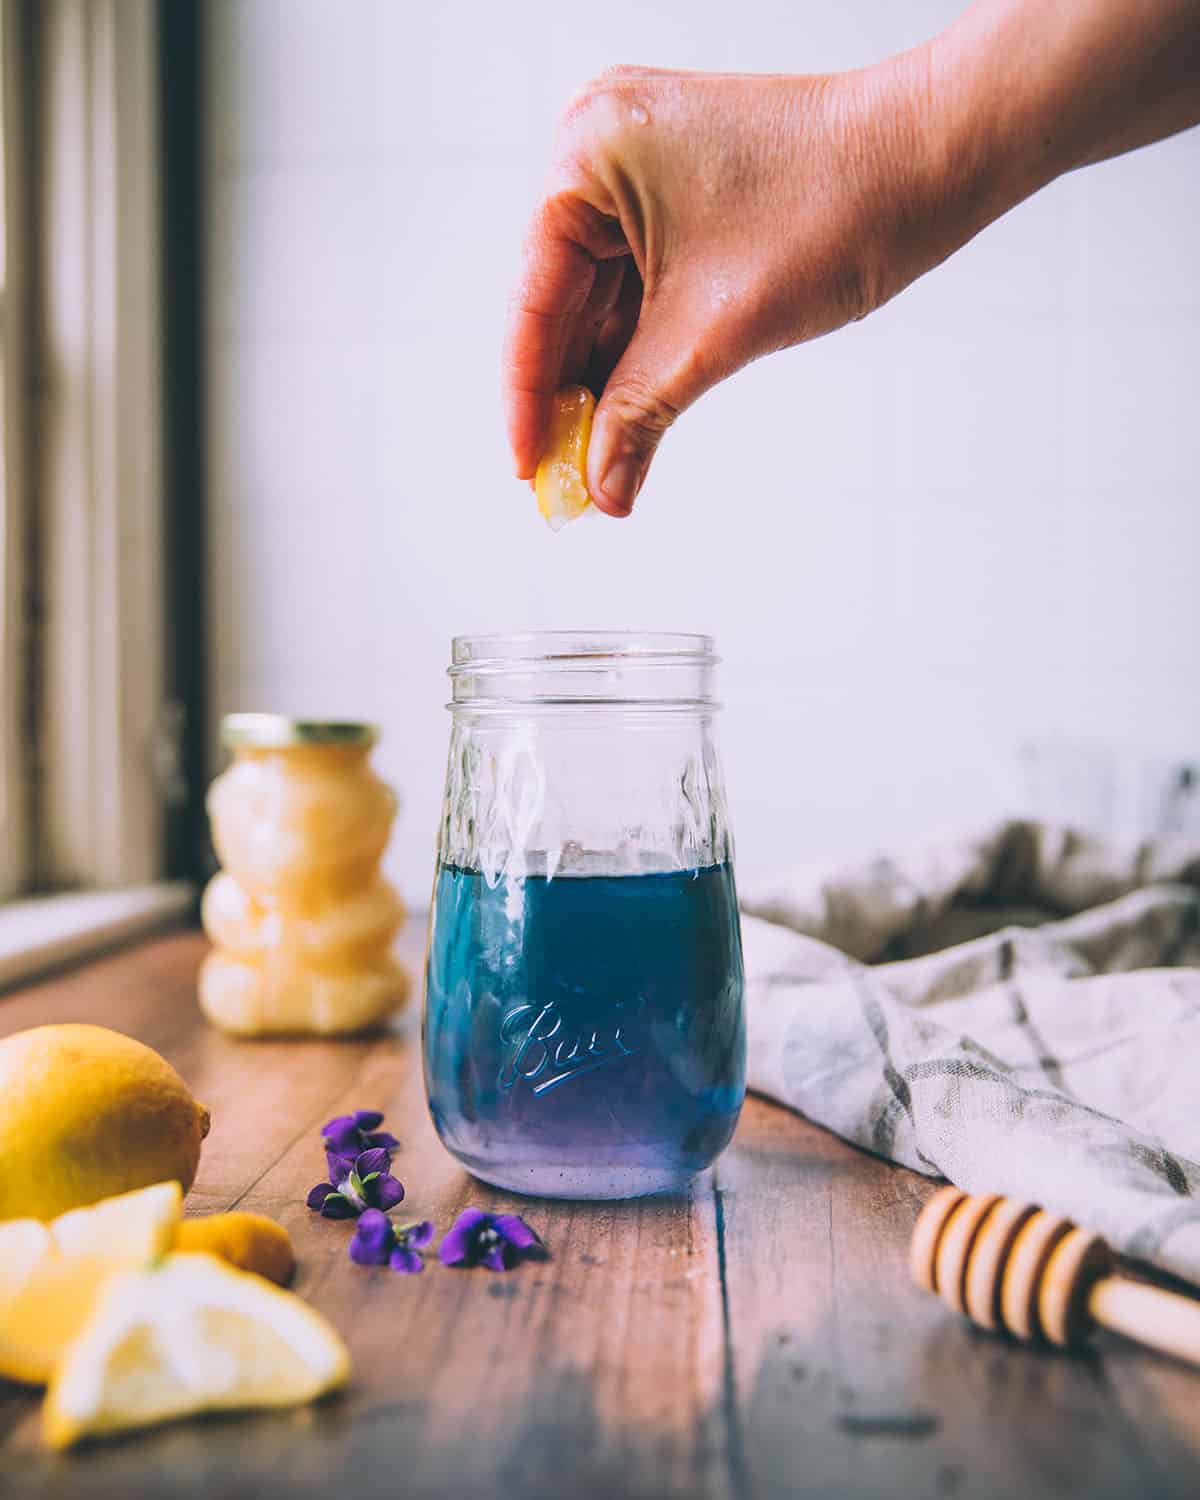 A jar of violet syrup changing color from purple at the bottom to turquoise at the top, with a lemon being squeezed into the jar. On a dark wood surface with a honey bear, honey wand, a lemon, and wild violet flowers surrounding. 